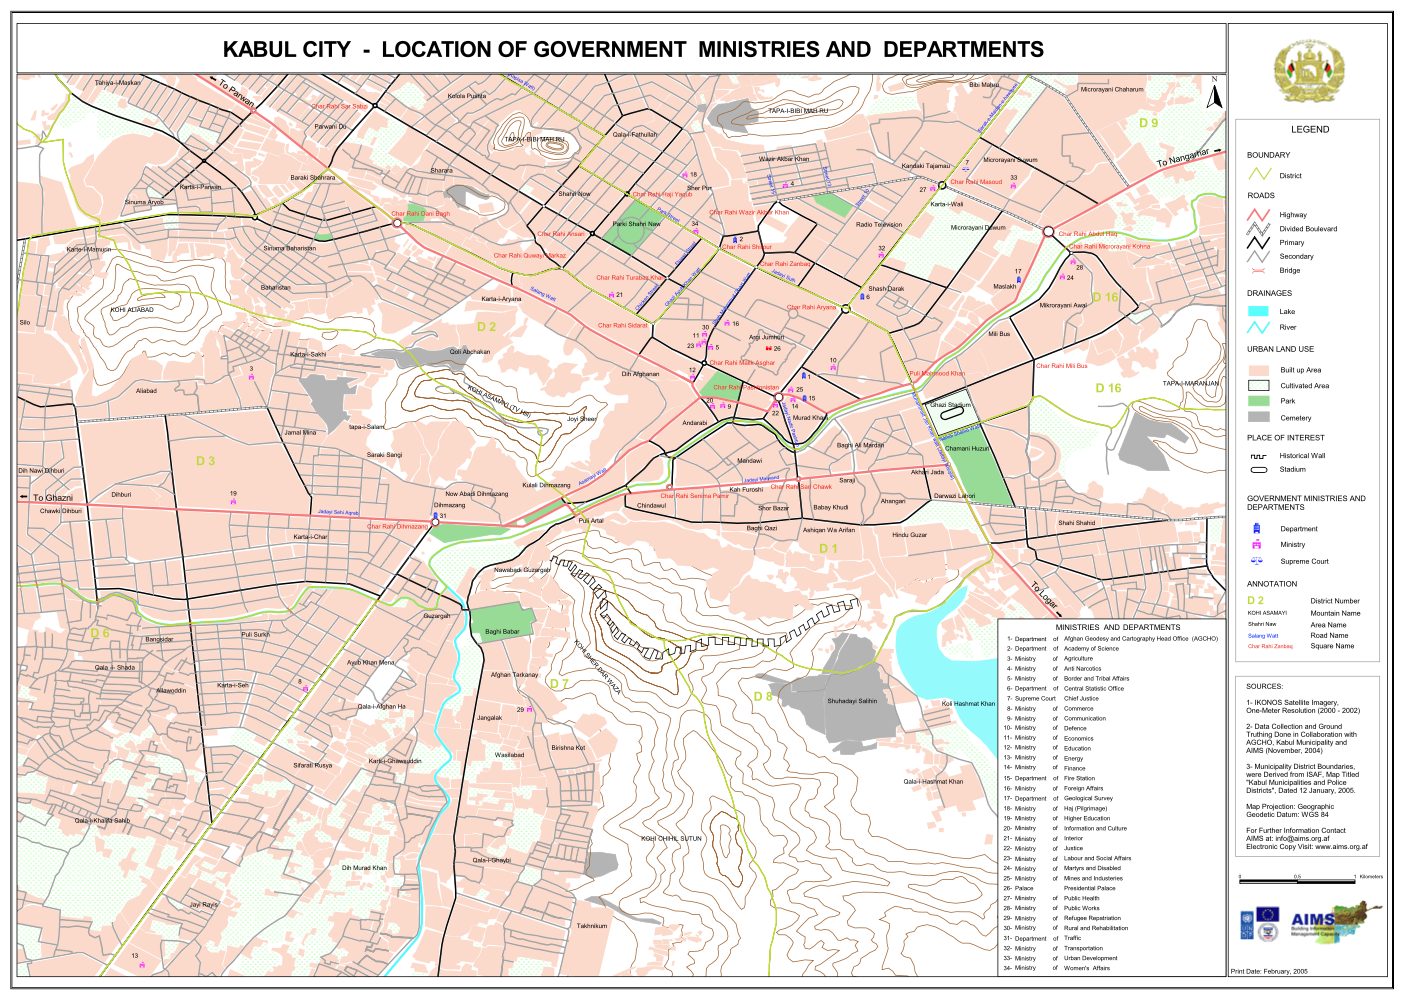 Kabul City Map - Location of Government Ministries and Departments